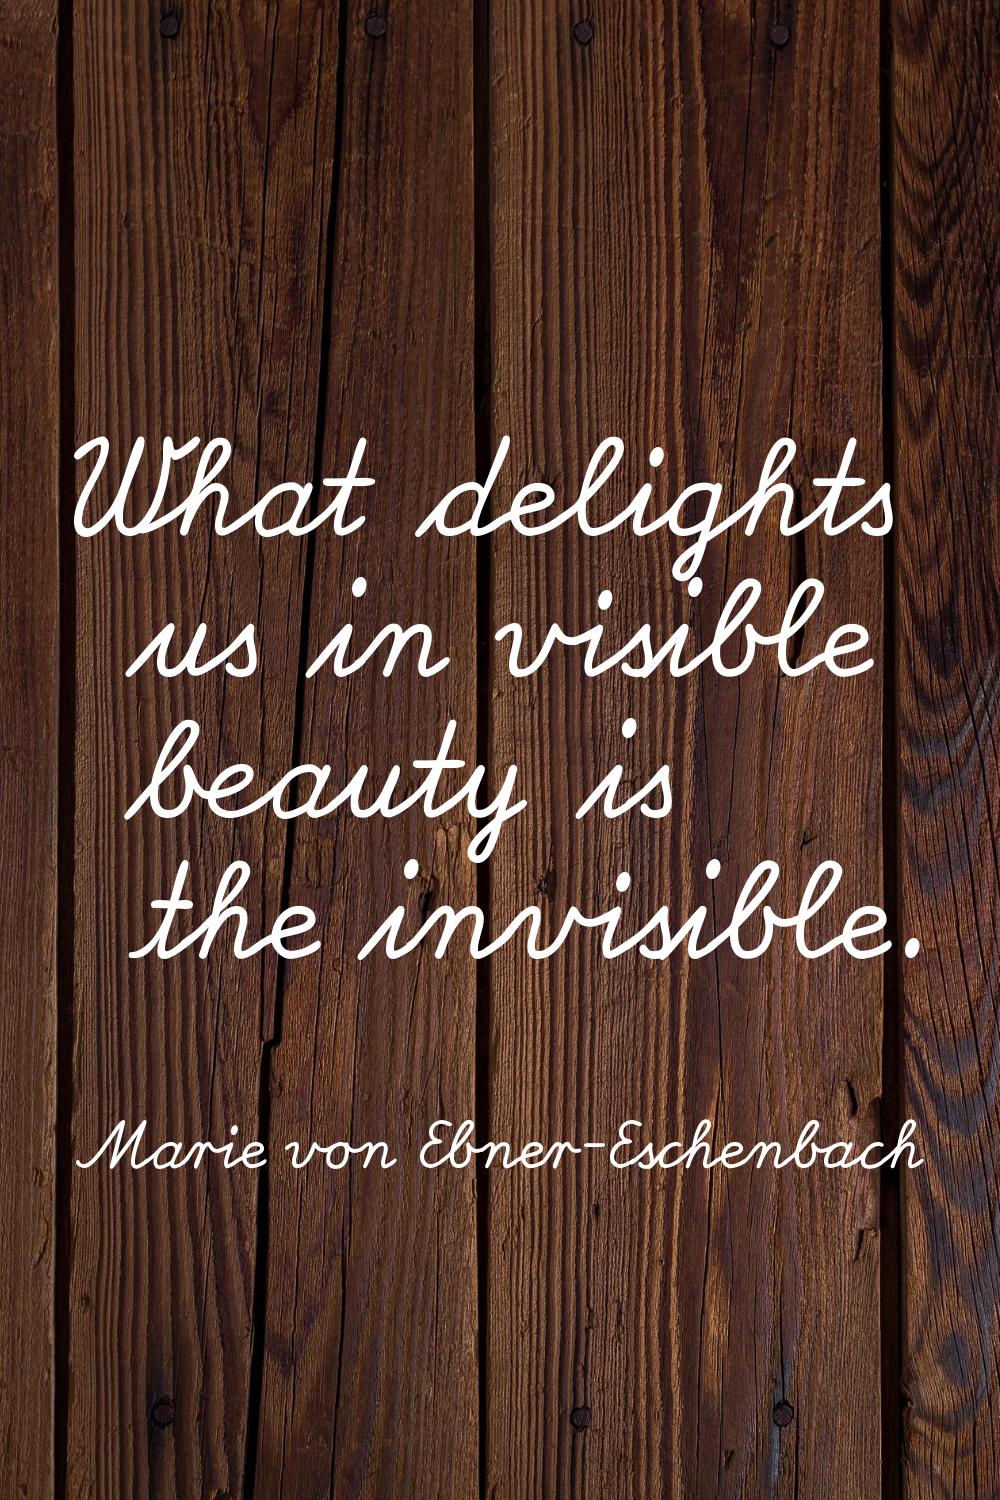 What delights us in visible beauty is the invisible.